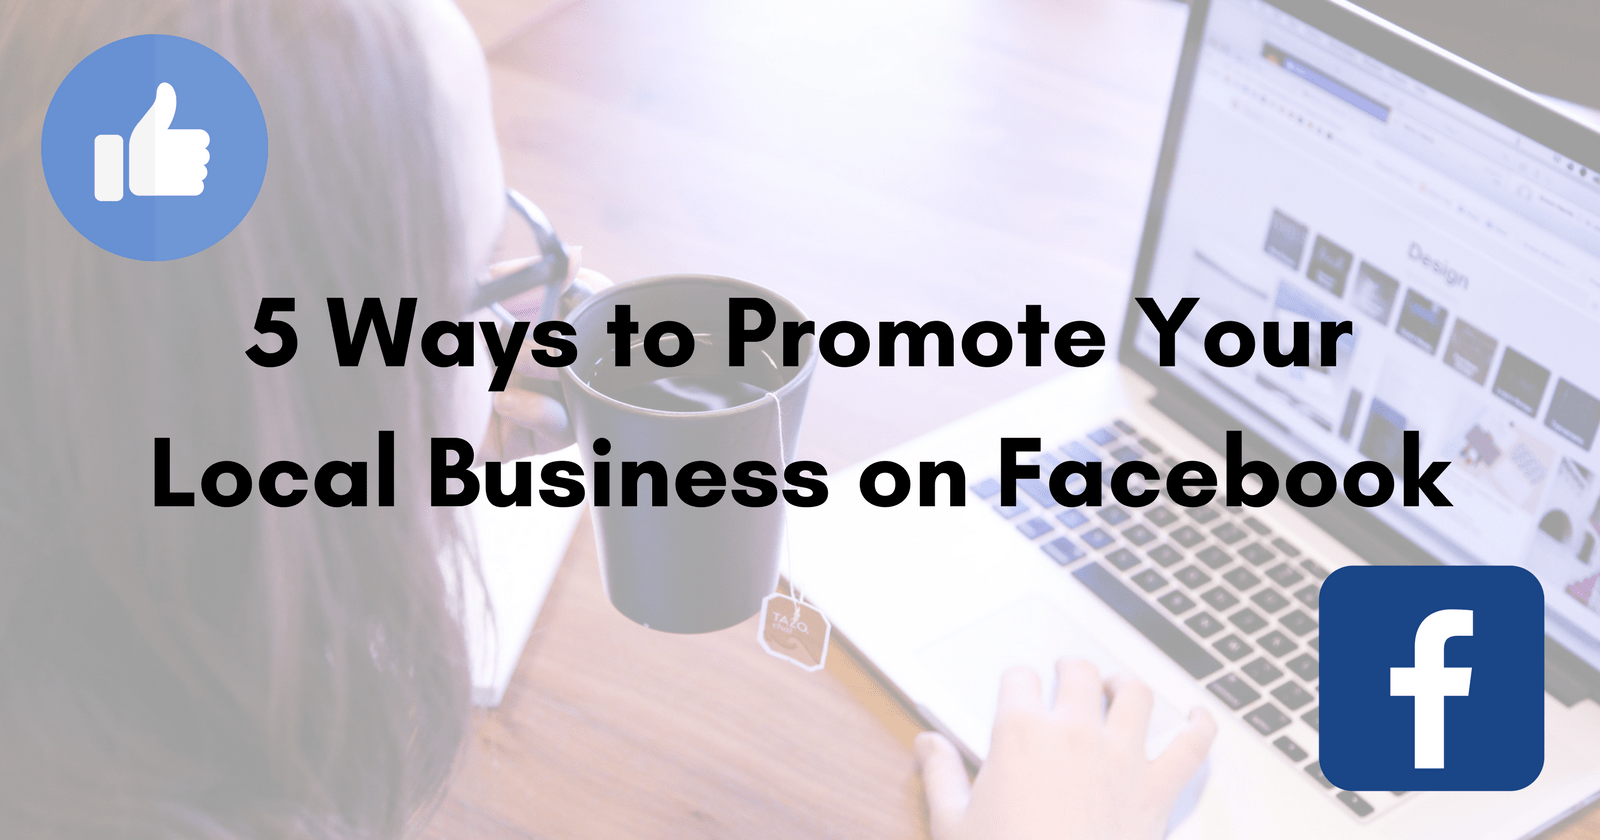 How to Promote Your Local Business on Facebook